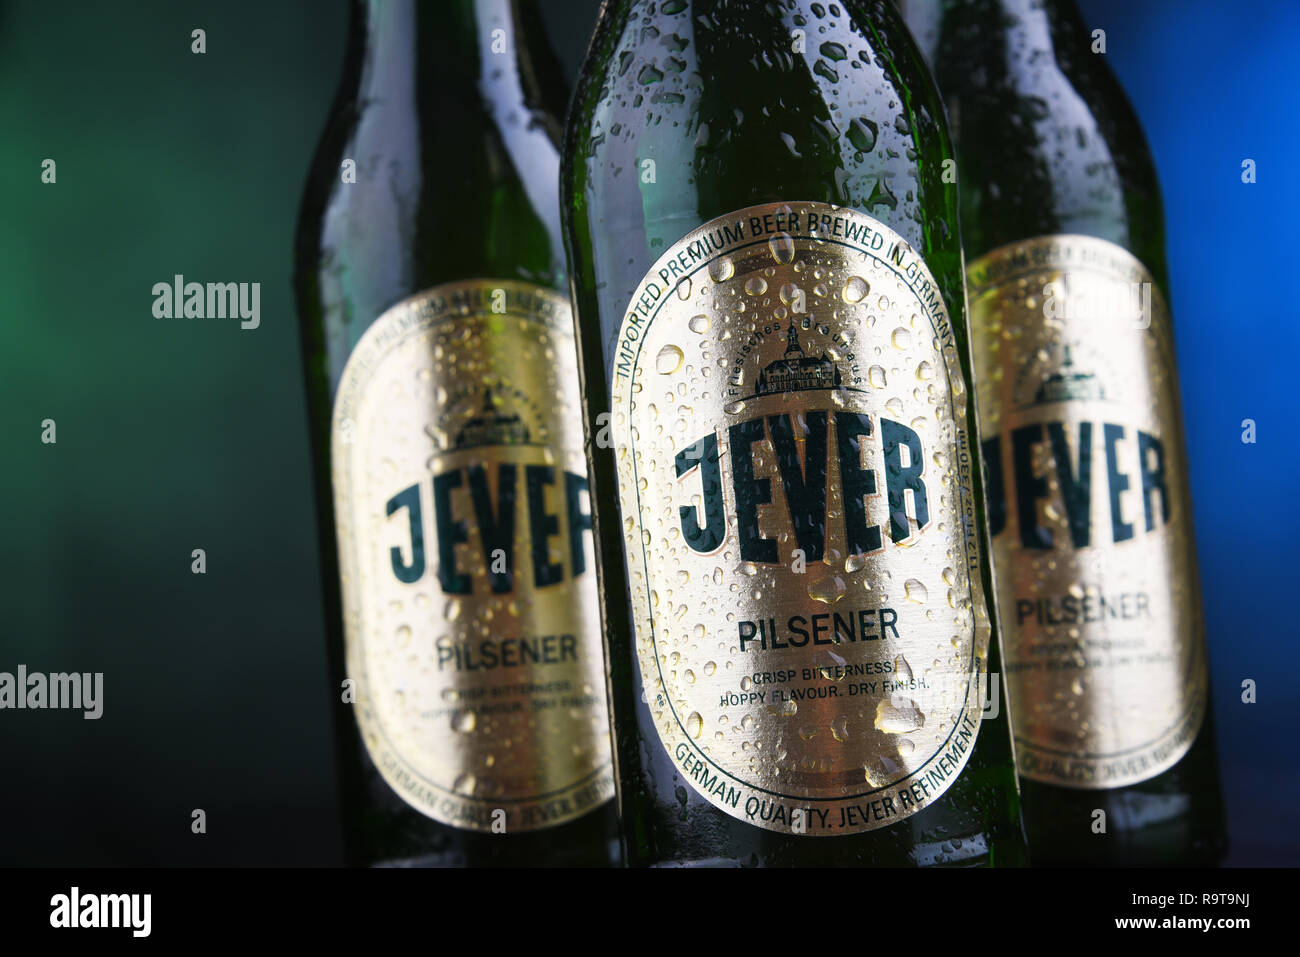 POZNAN, POL - DEC 12, 2018: Bottles Jever, a popular brand of beer produced by Friesisches Brauhaus in Jever, Friesland in Lower Saxony, Germany Stock Photo